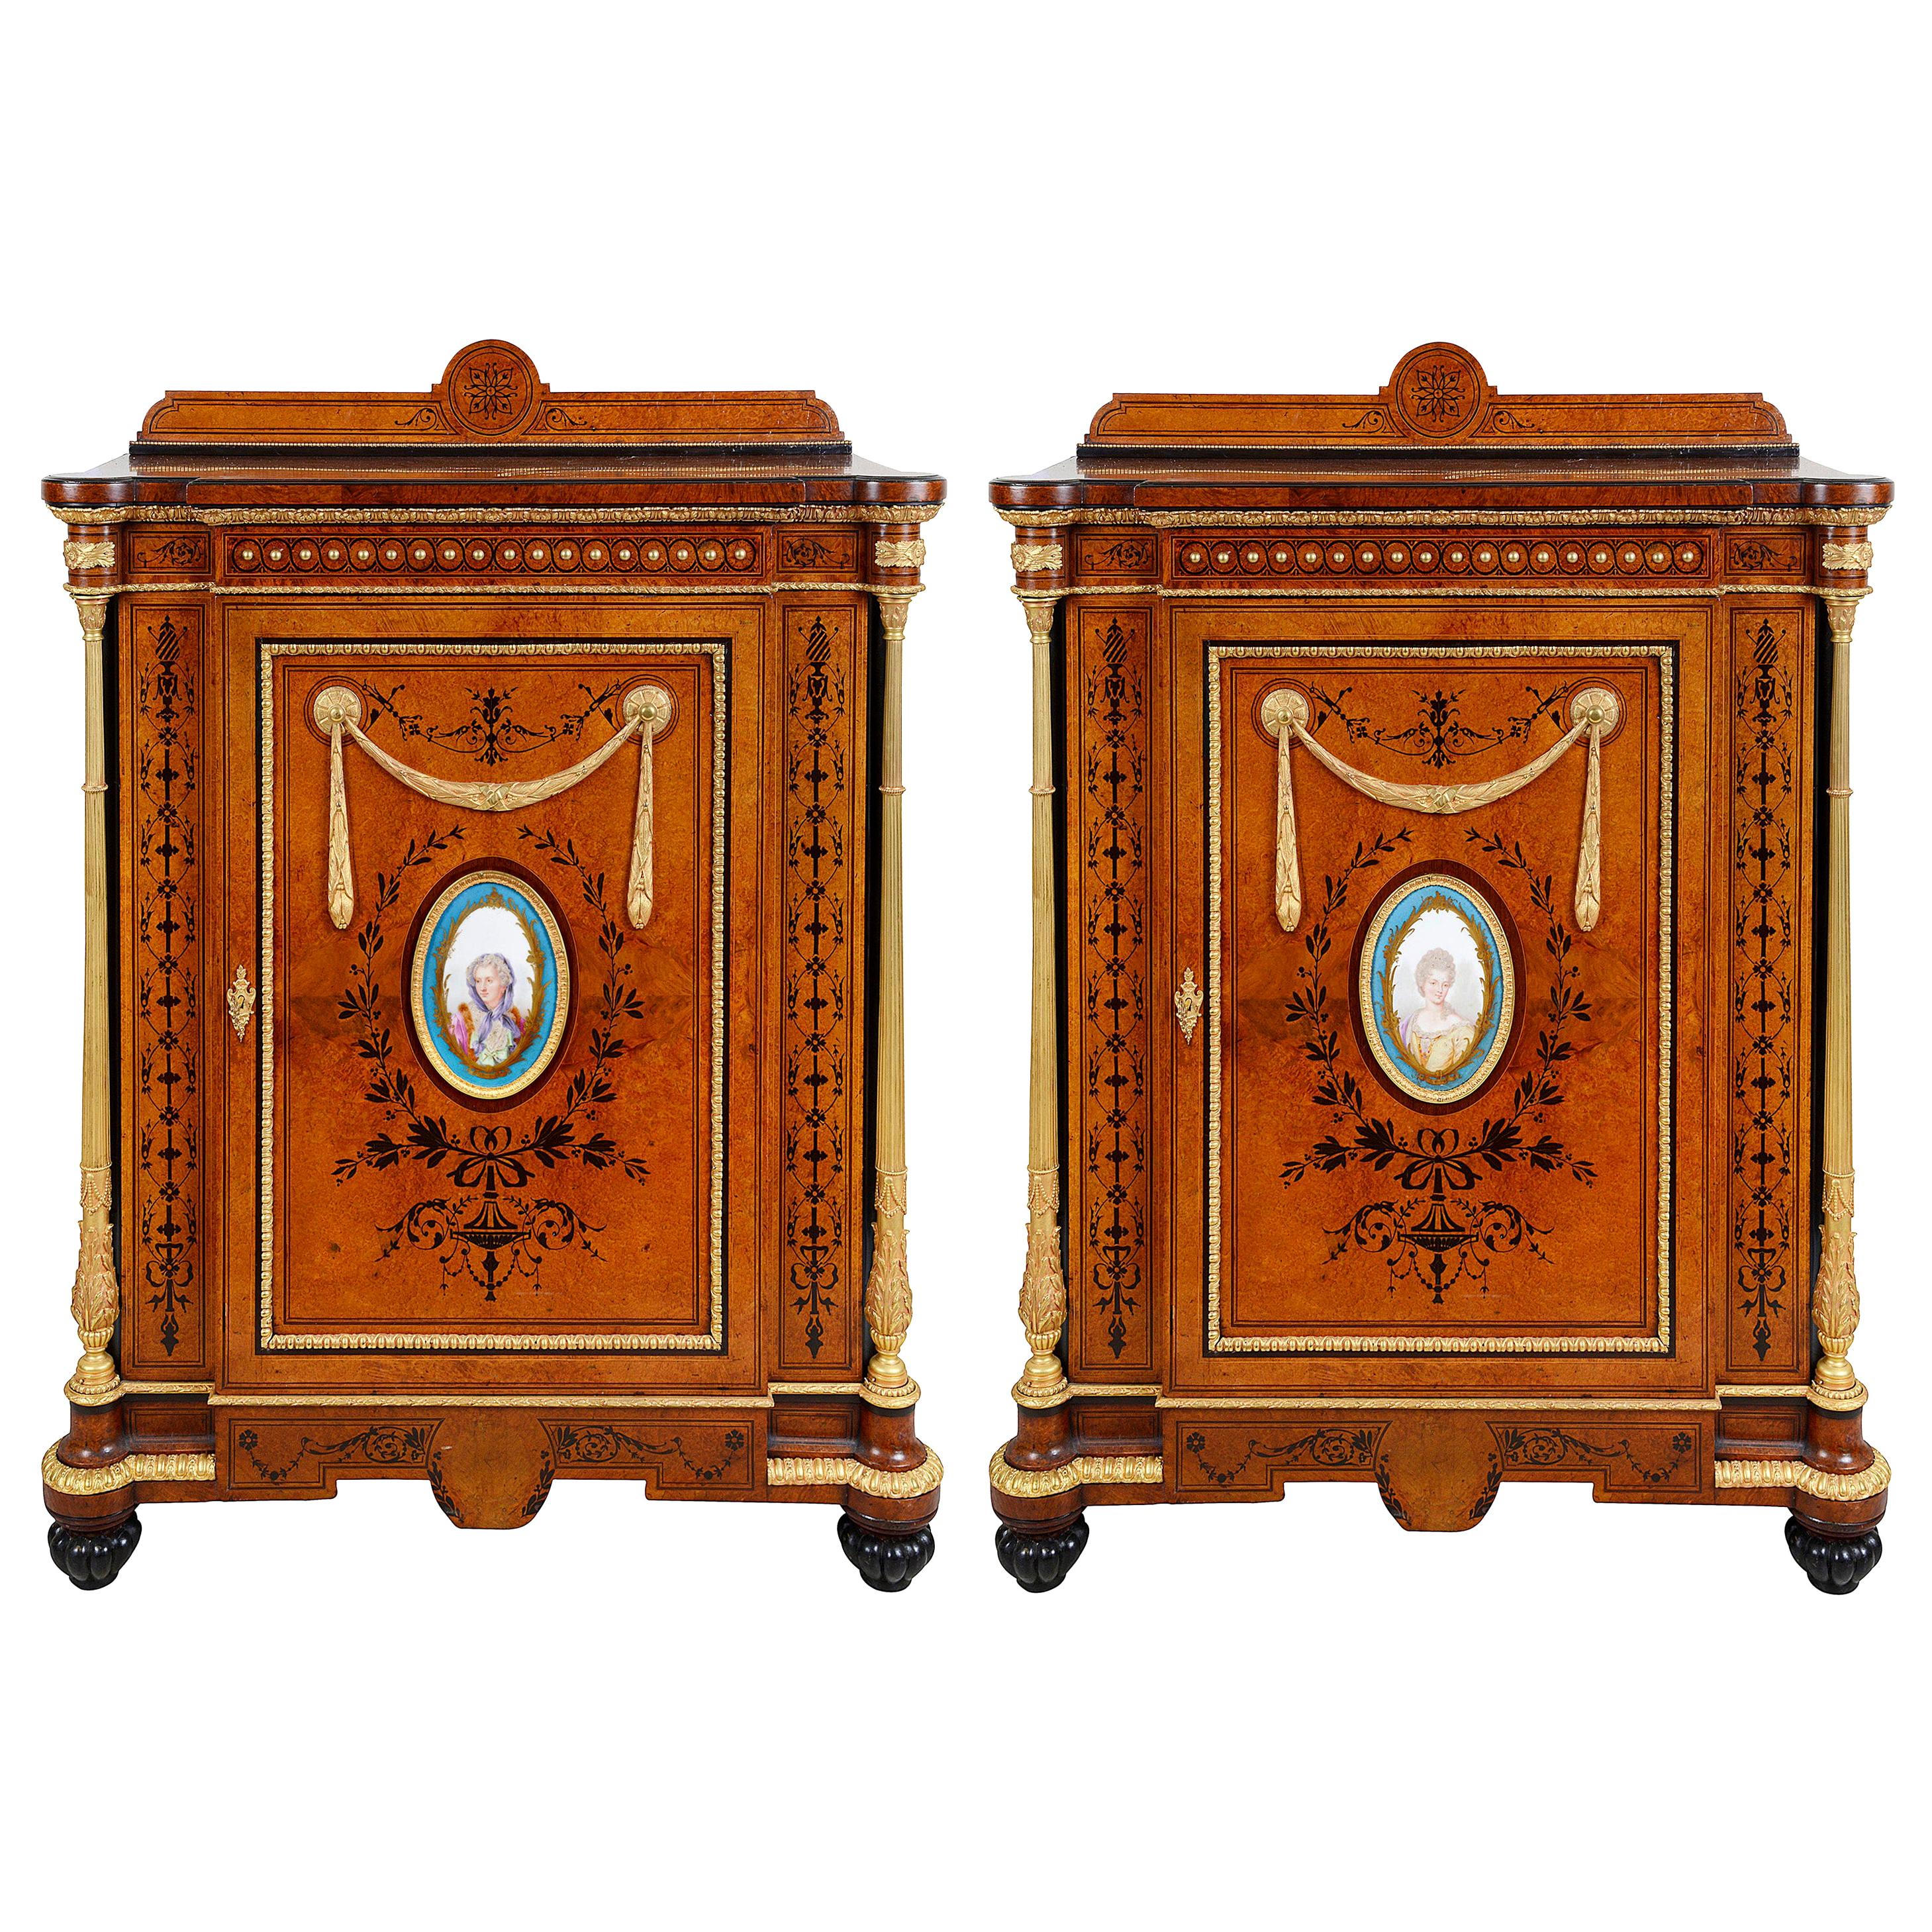 Pair of 19th Century Sevres Porcelain Mounted Side Cabinets